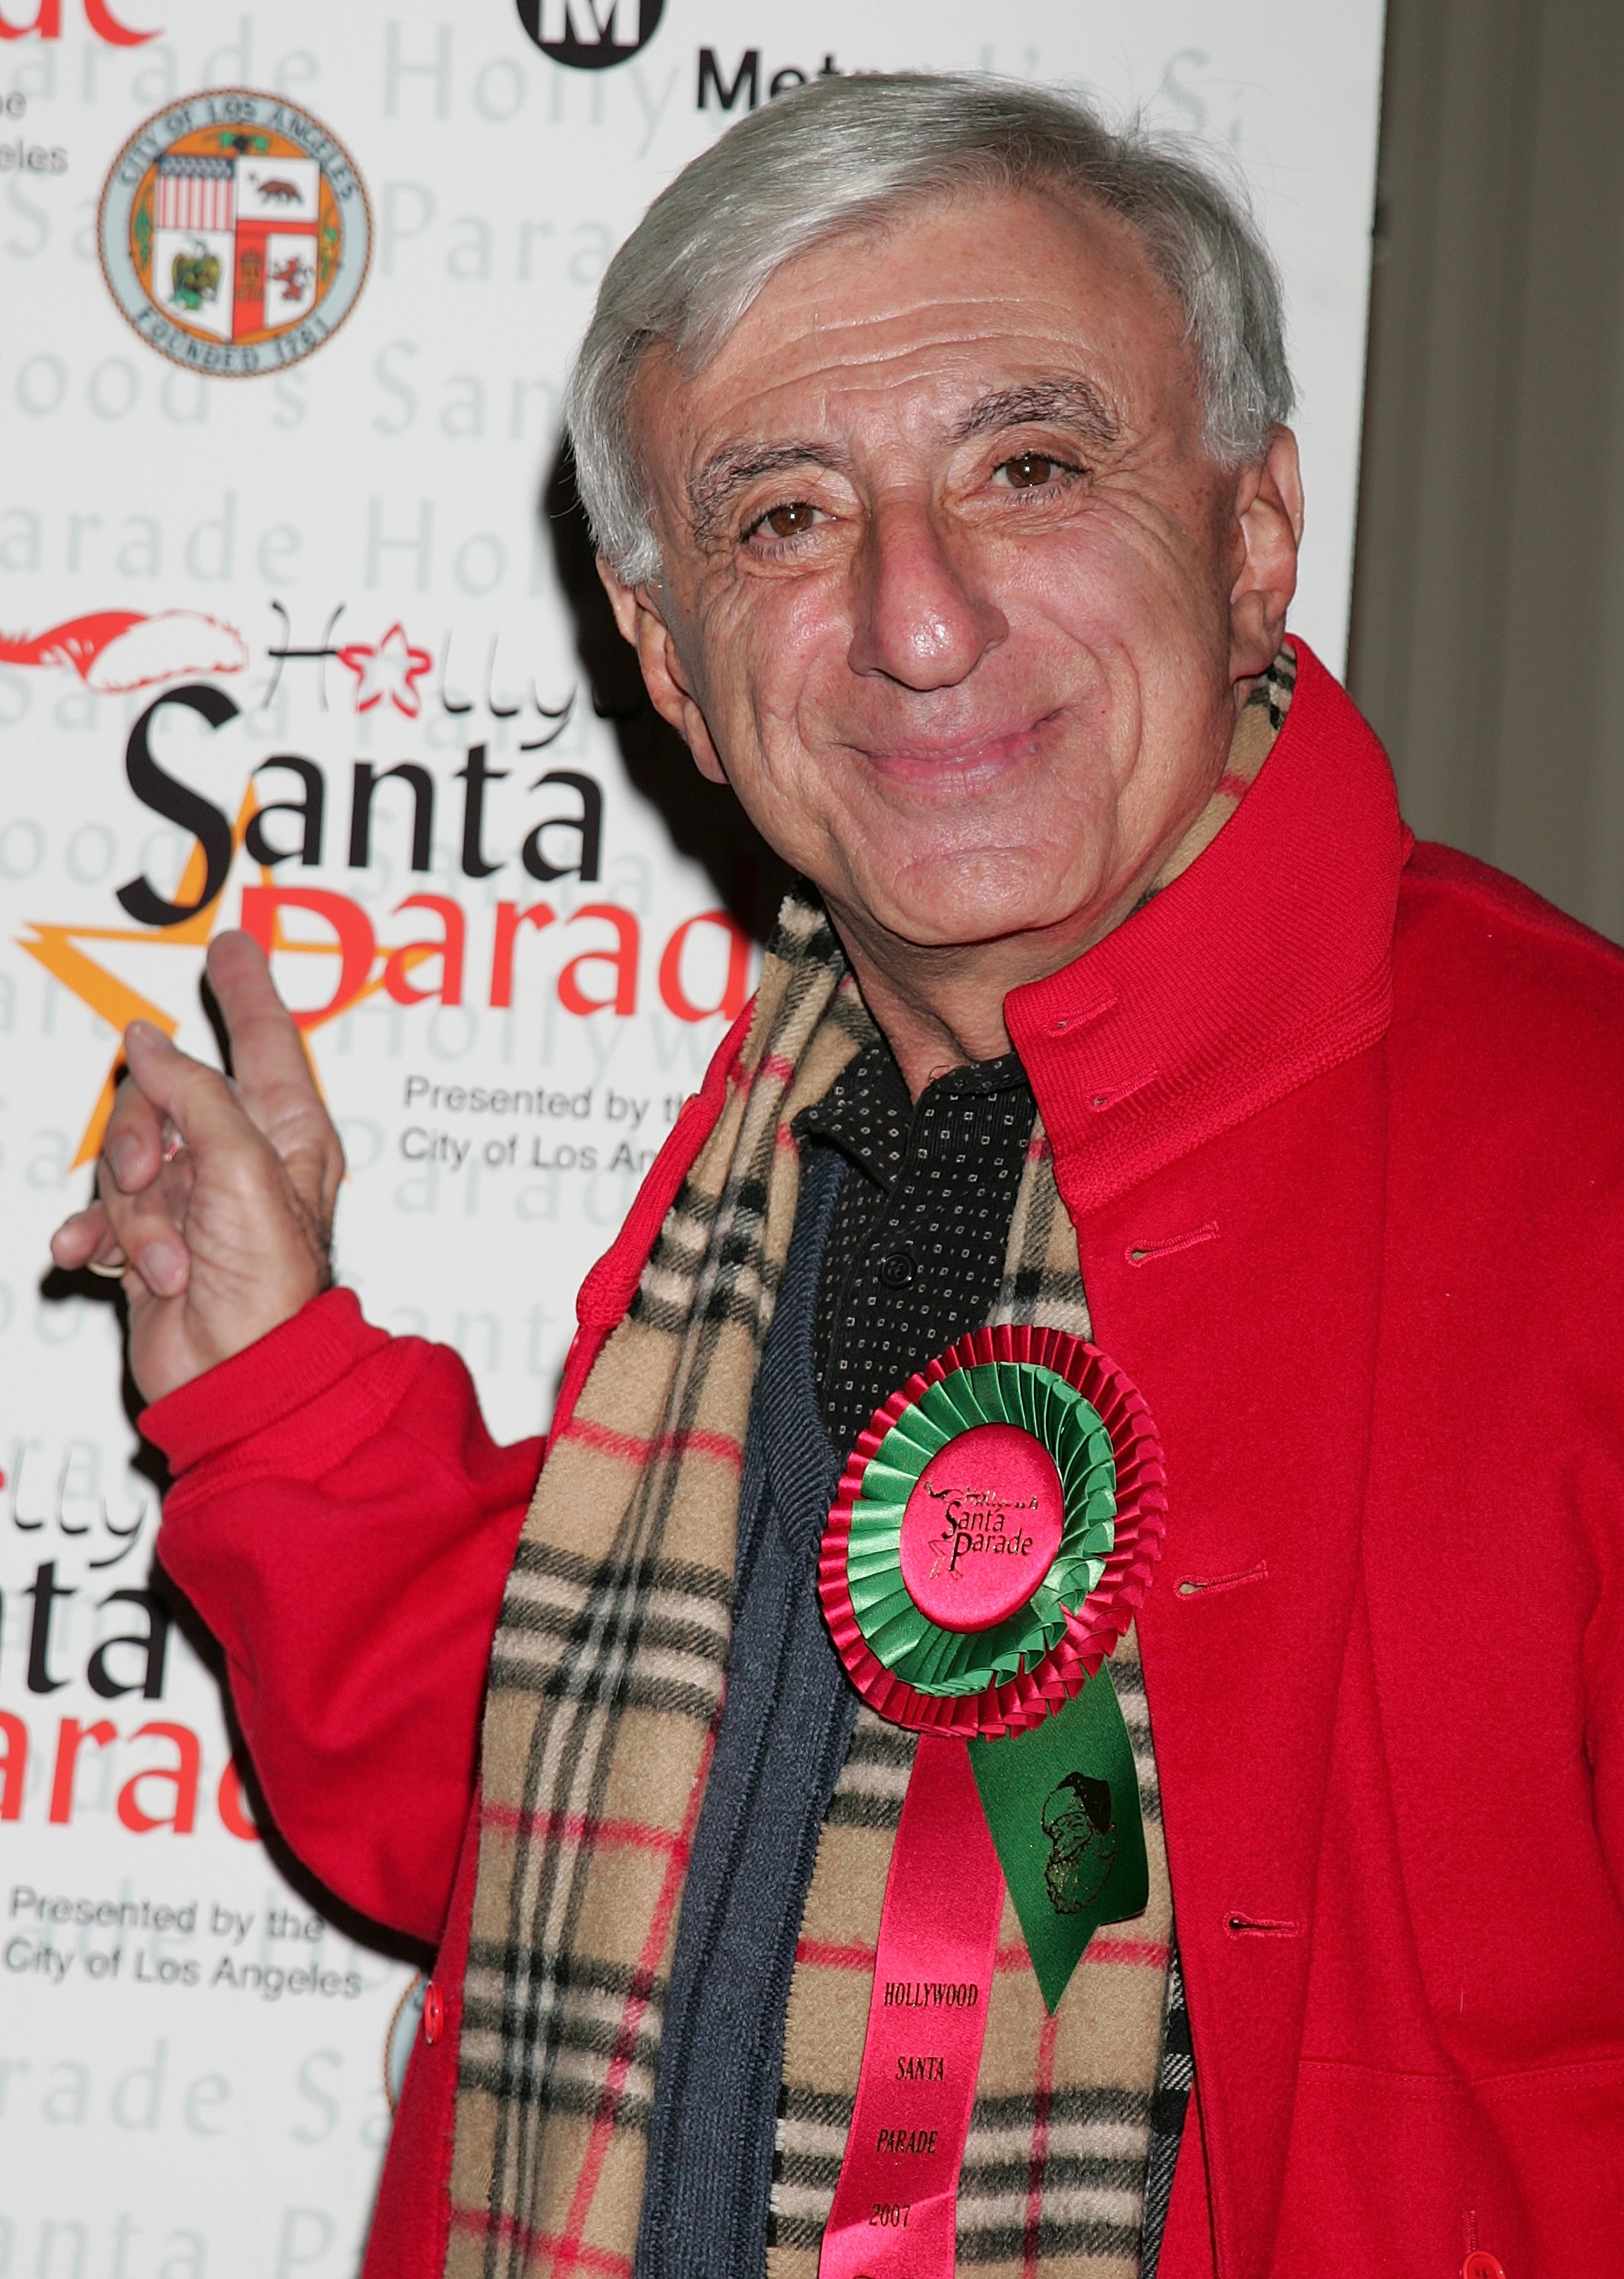  Actor Jamie Farr arrives for the 2007 Hollywood's Santa Parade at the Renaissance Hollywood Hotel on November 25, 2007 in Hollywood, California. | Source: Getty Images